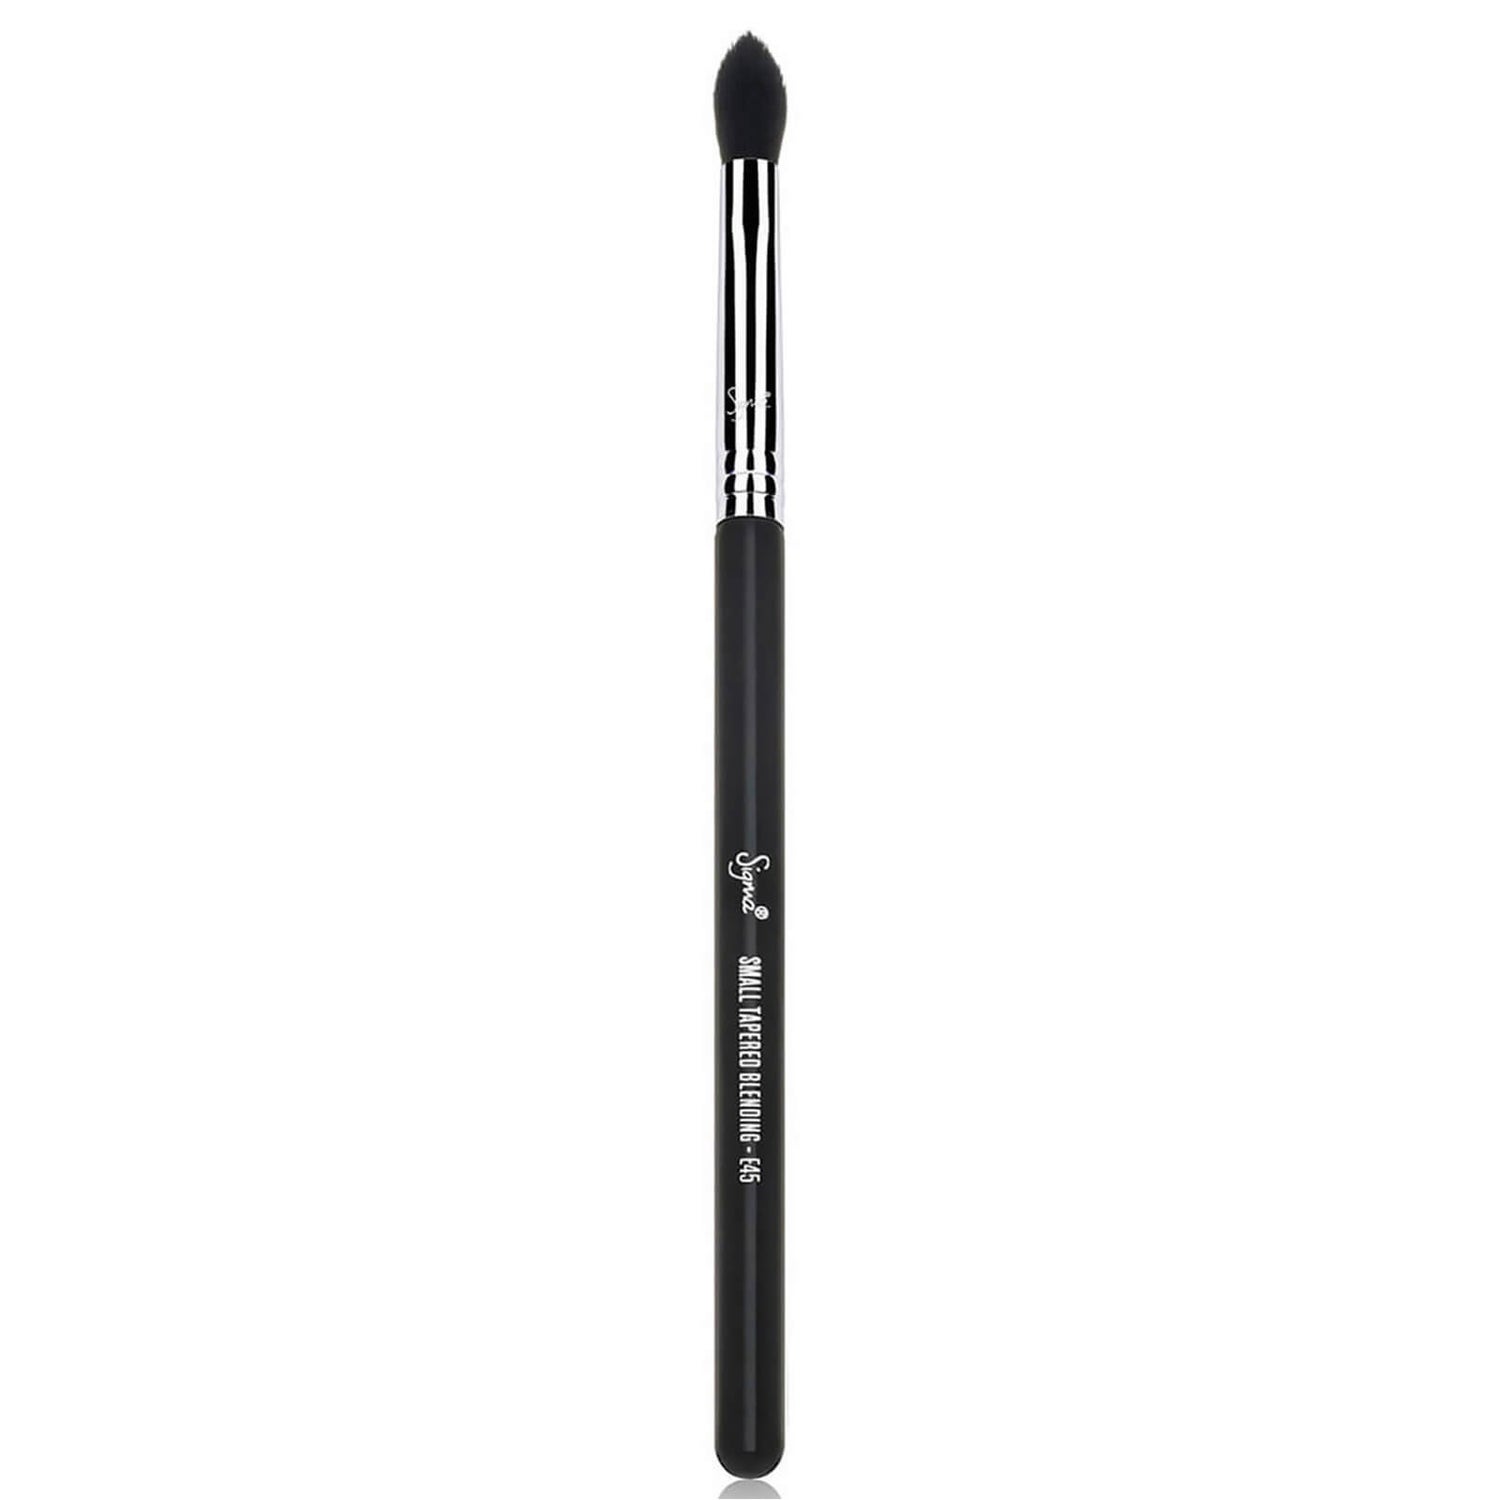 Sigma Beauty E45 - Small Tapered Blending Pinsel